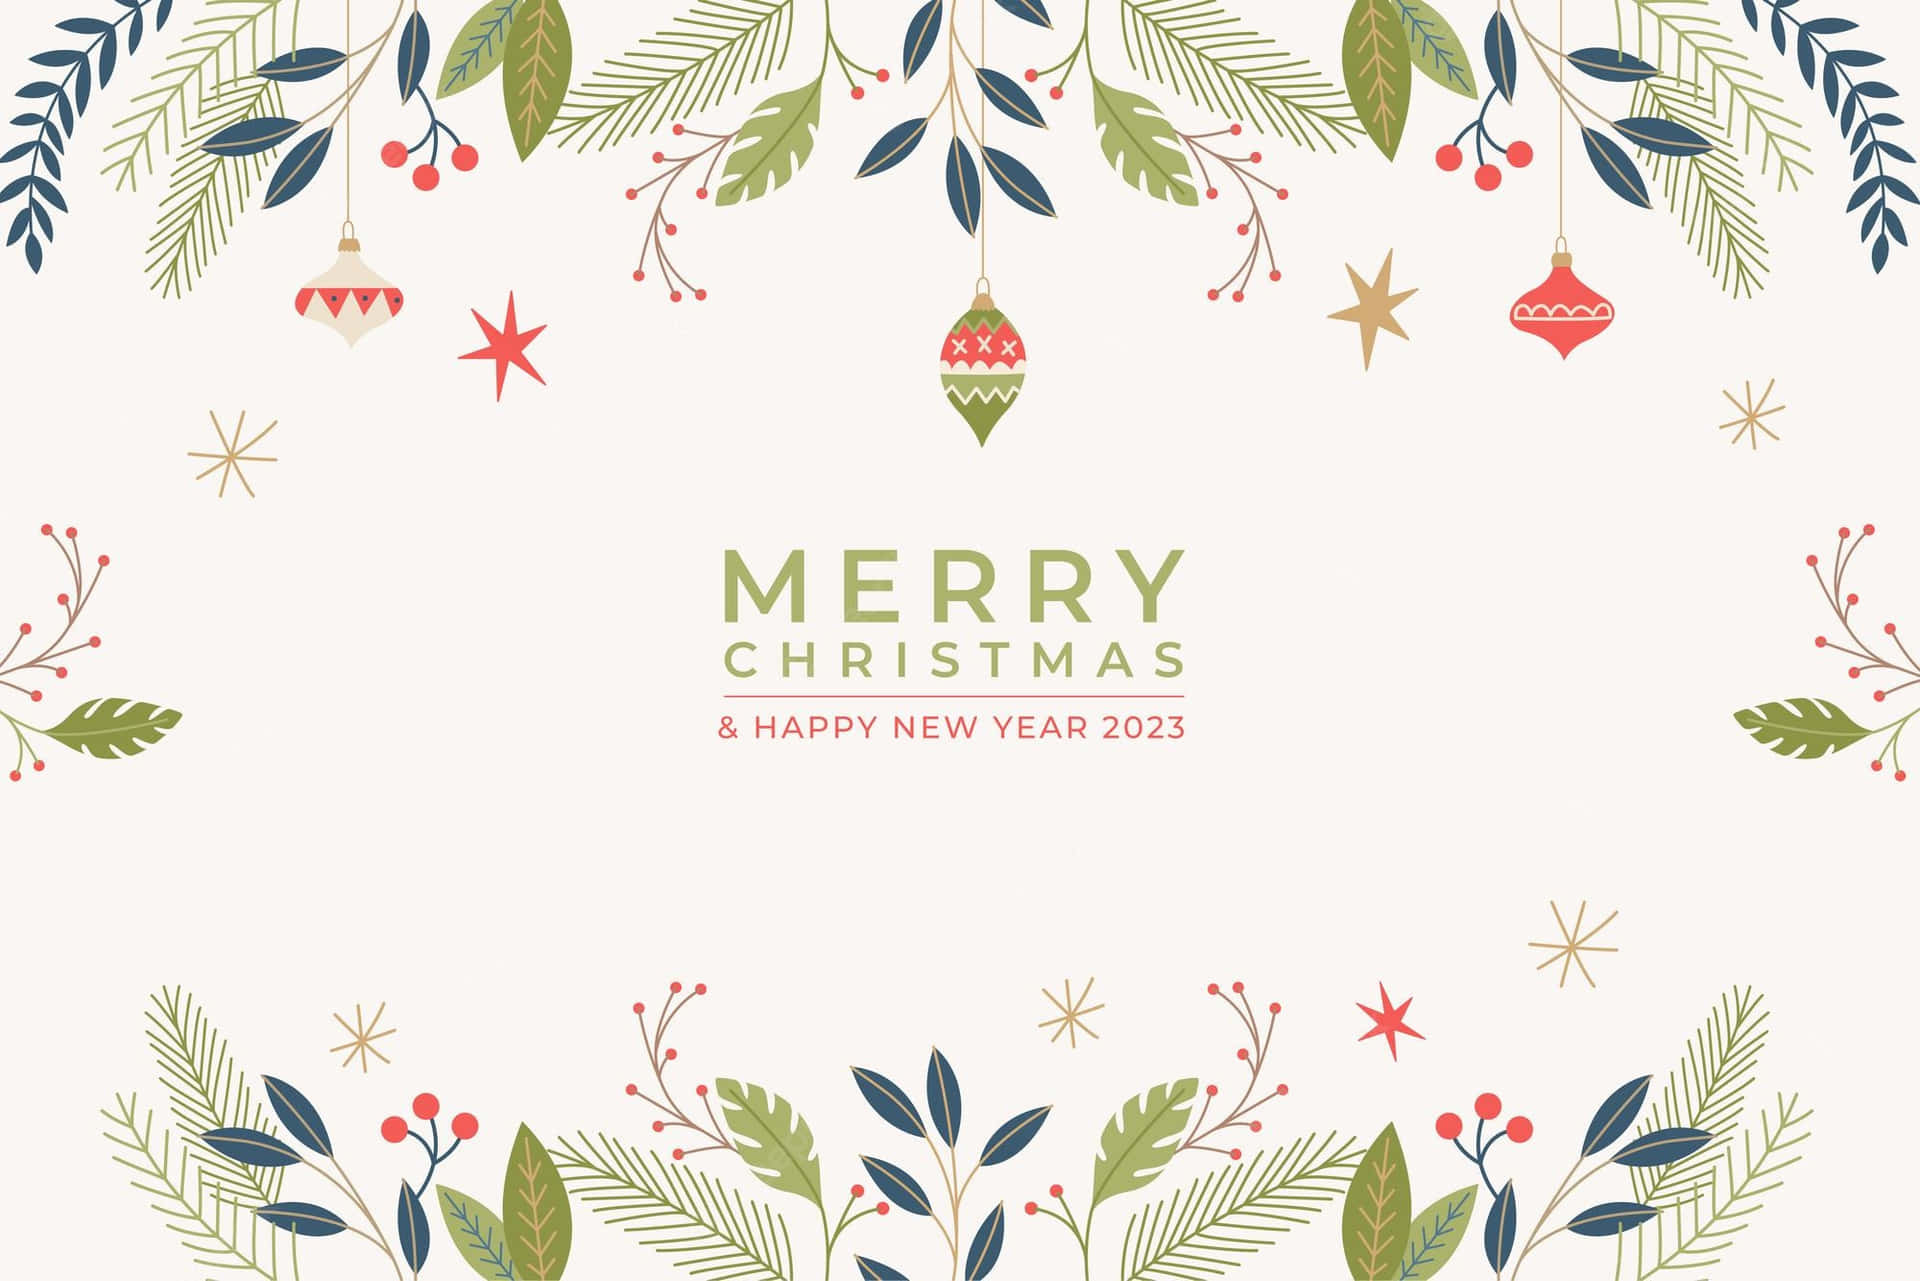 Send warm wishes this holiday with a special Christmas card.